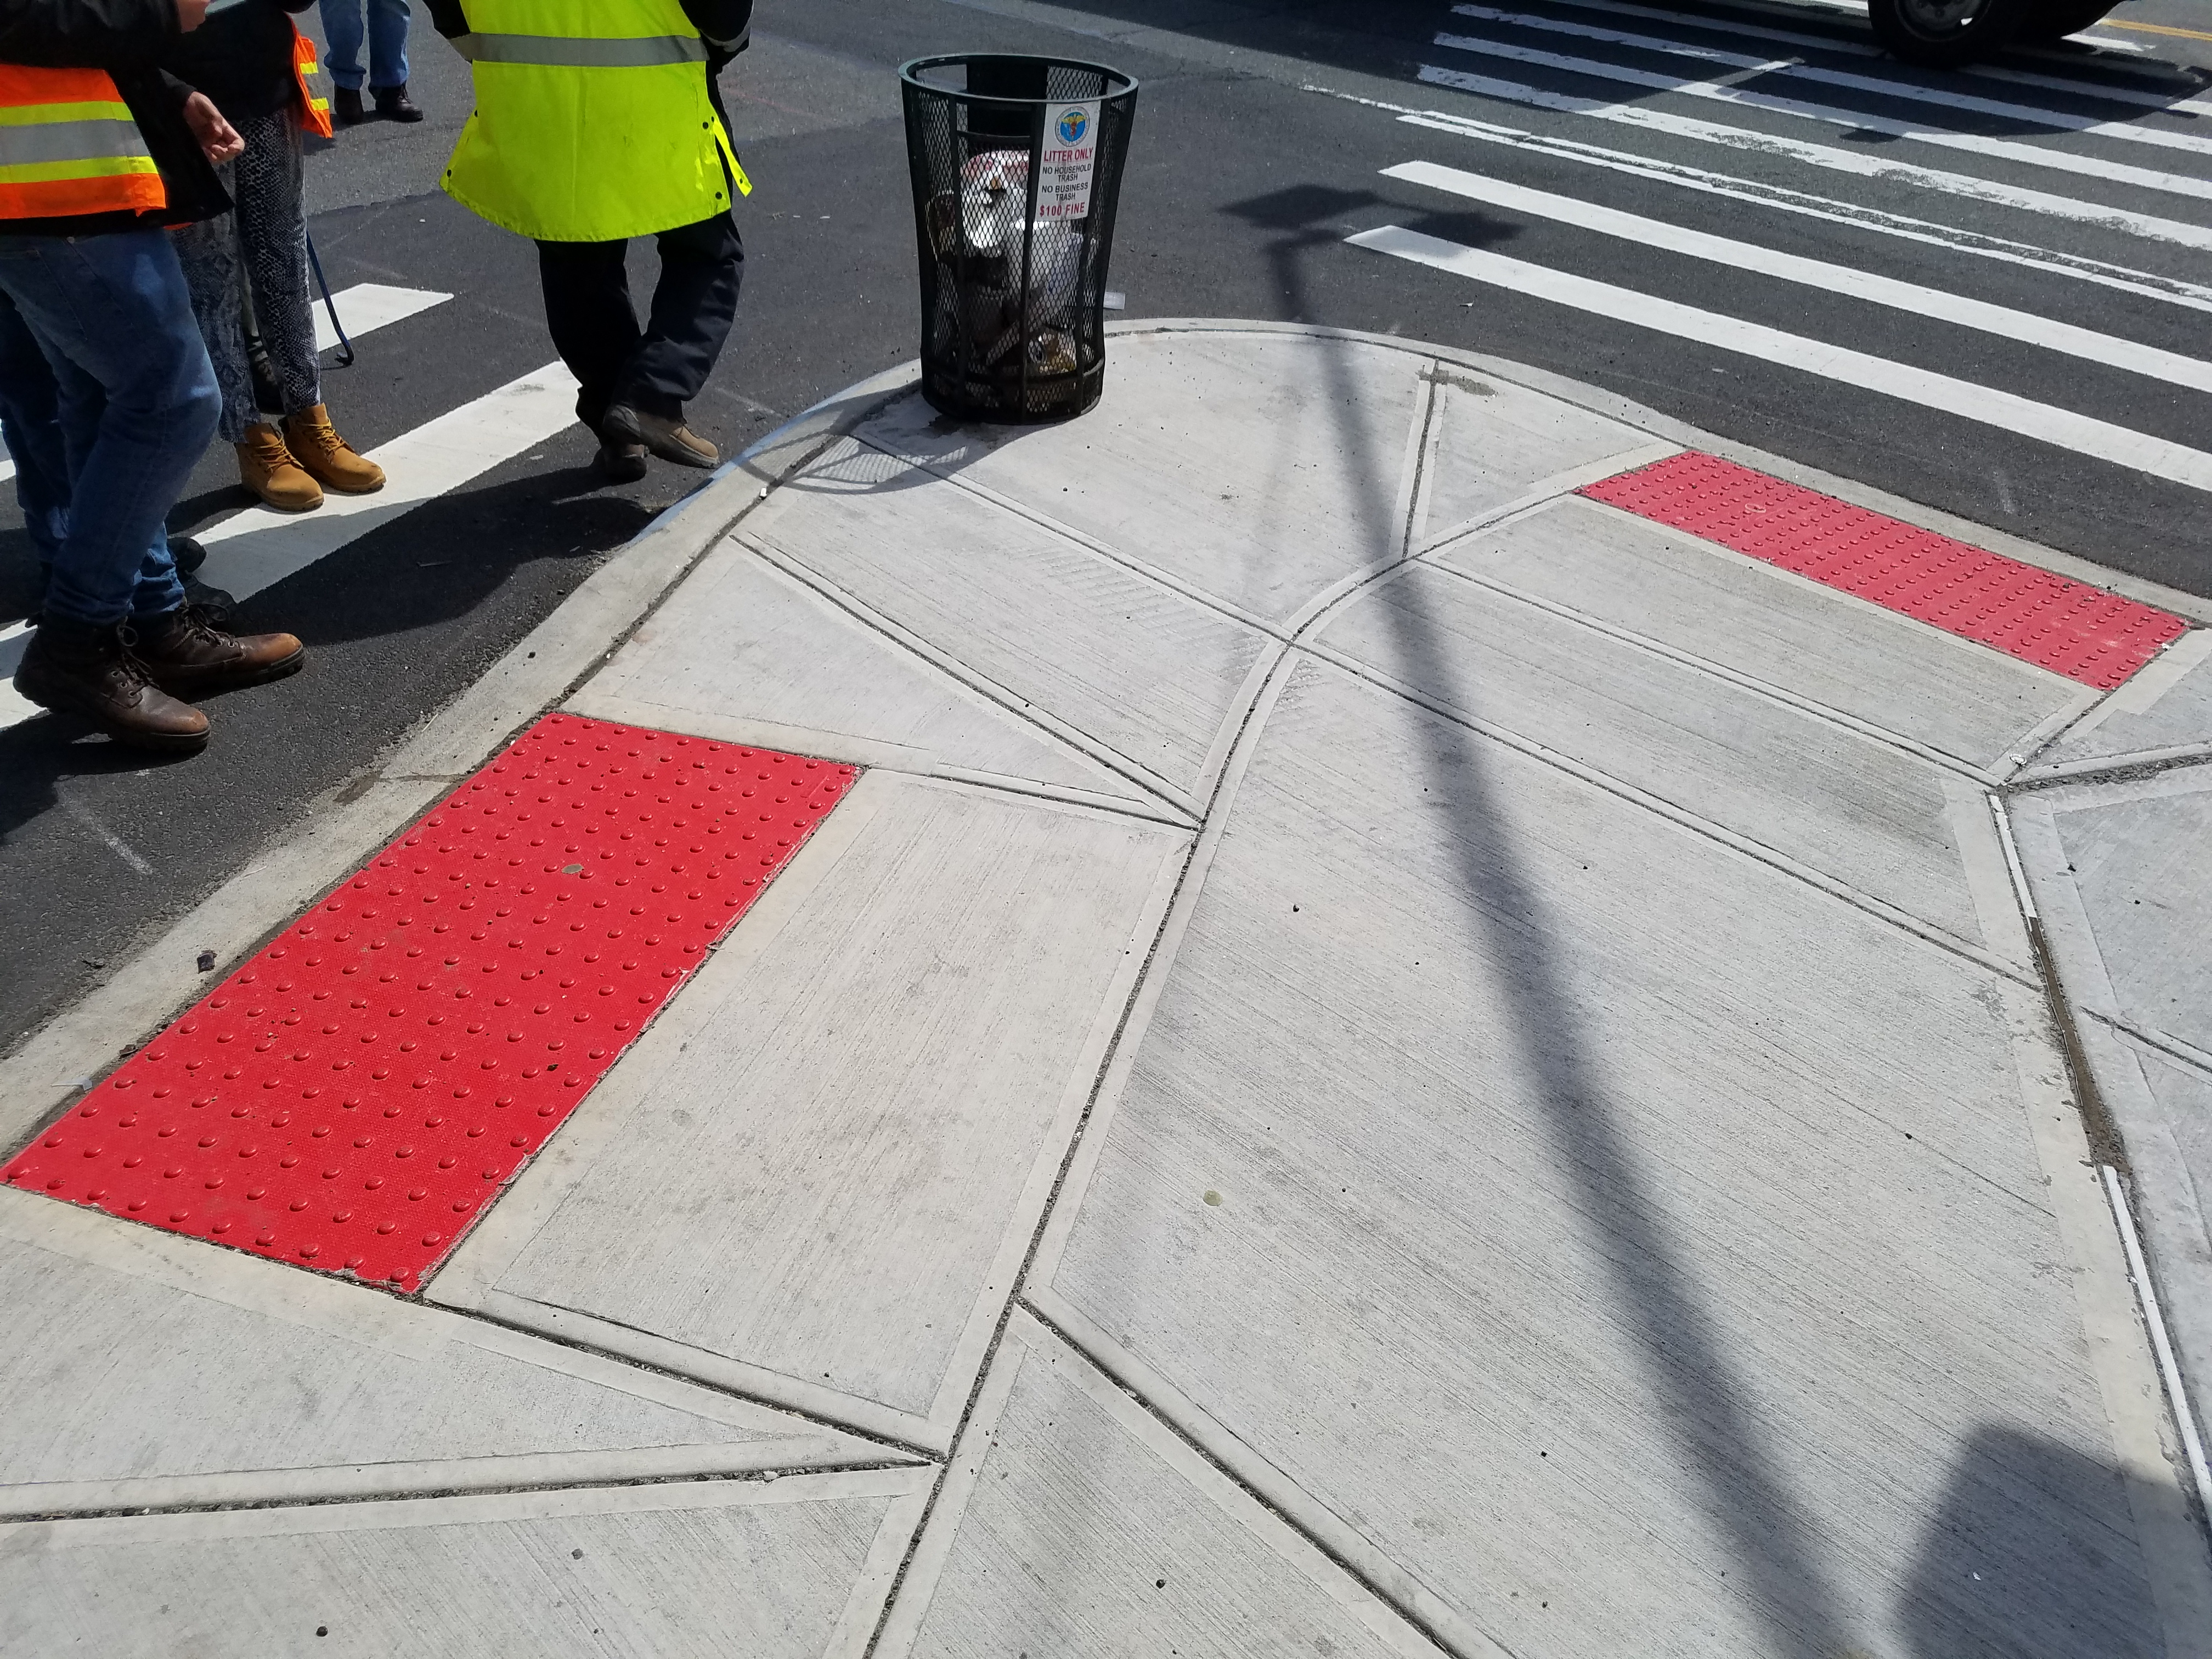 Pedestrian ramps found on corners of NYC streets are ADA compliant